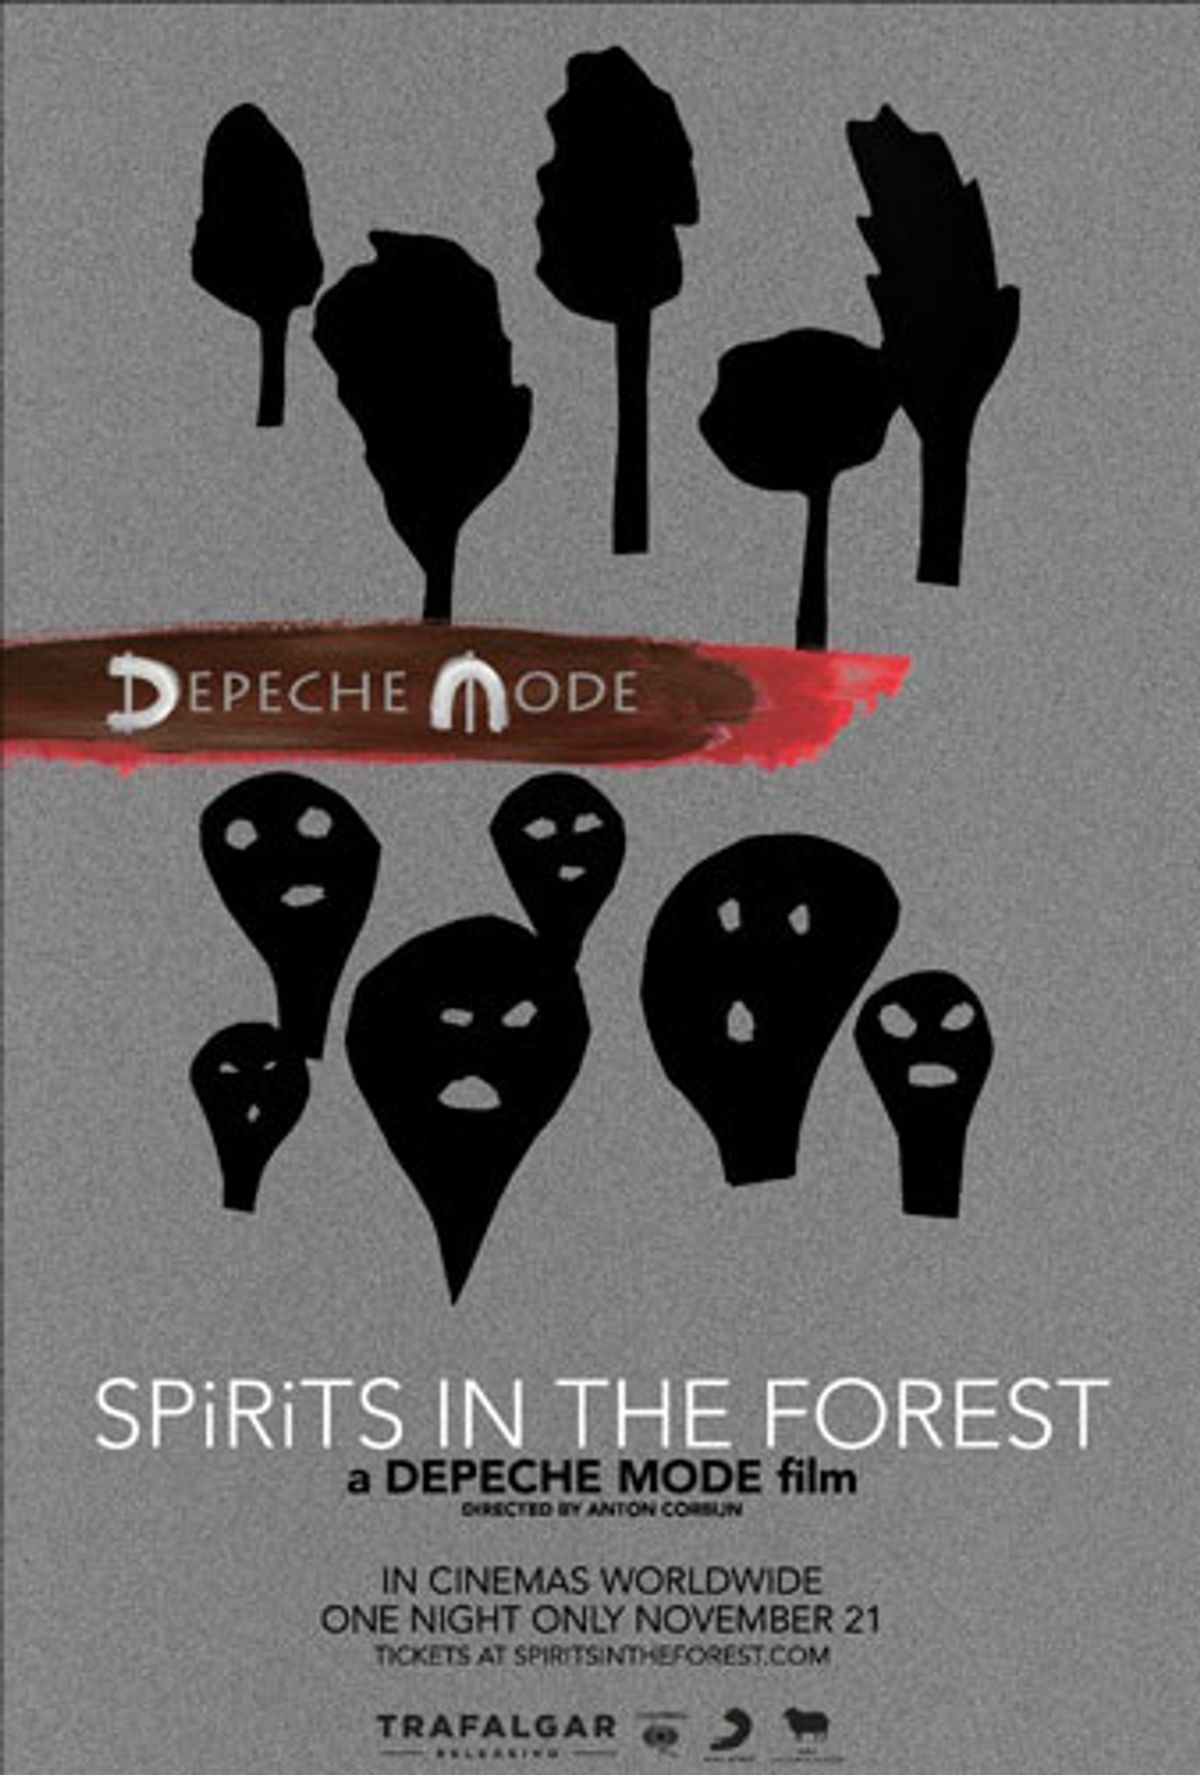 Depeche Mode Announces 'Spirits in the Forest' Documentary